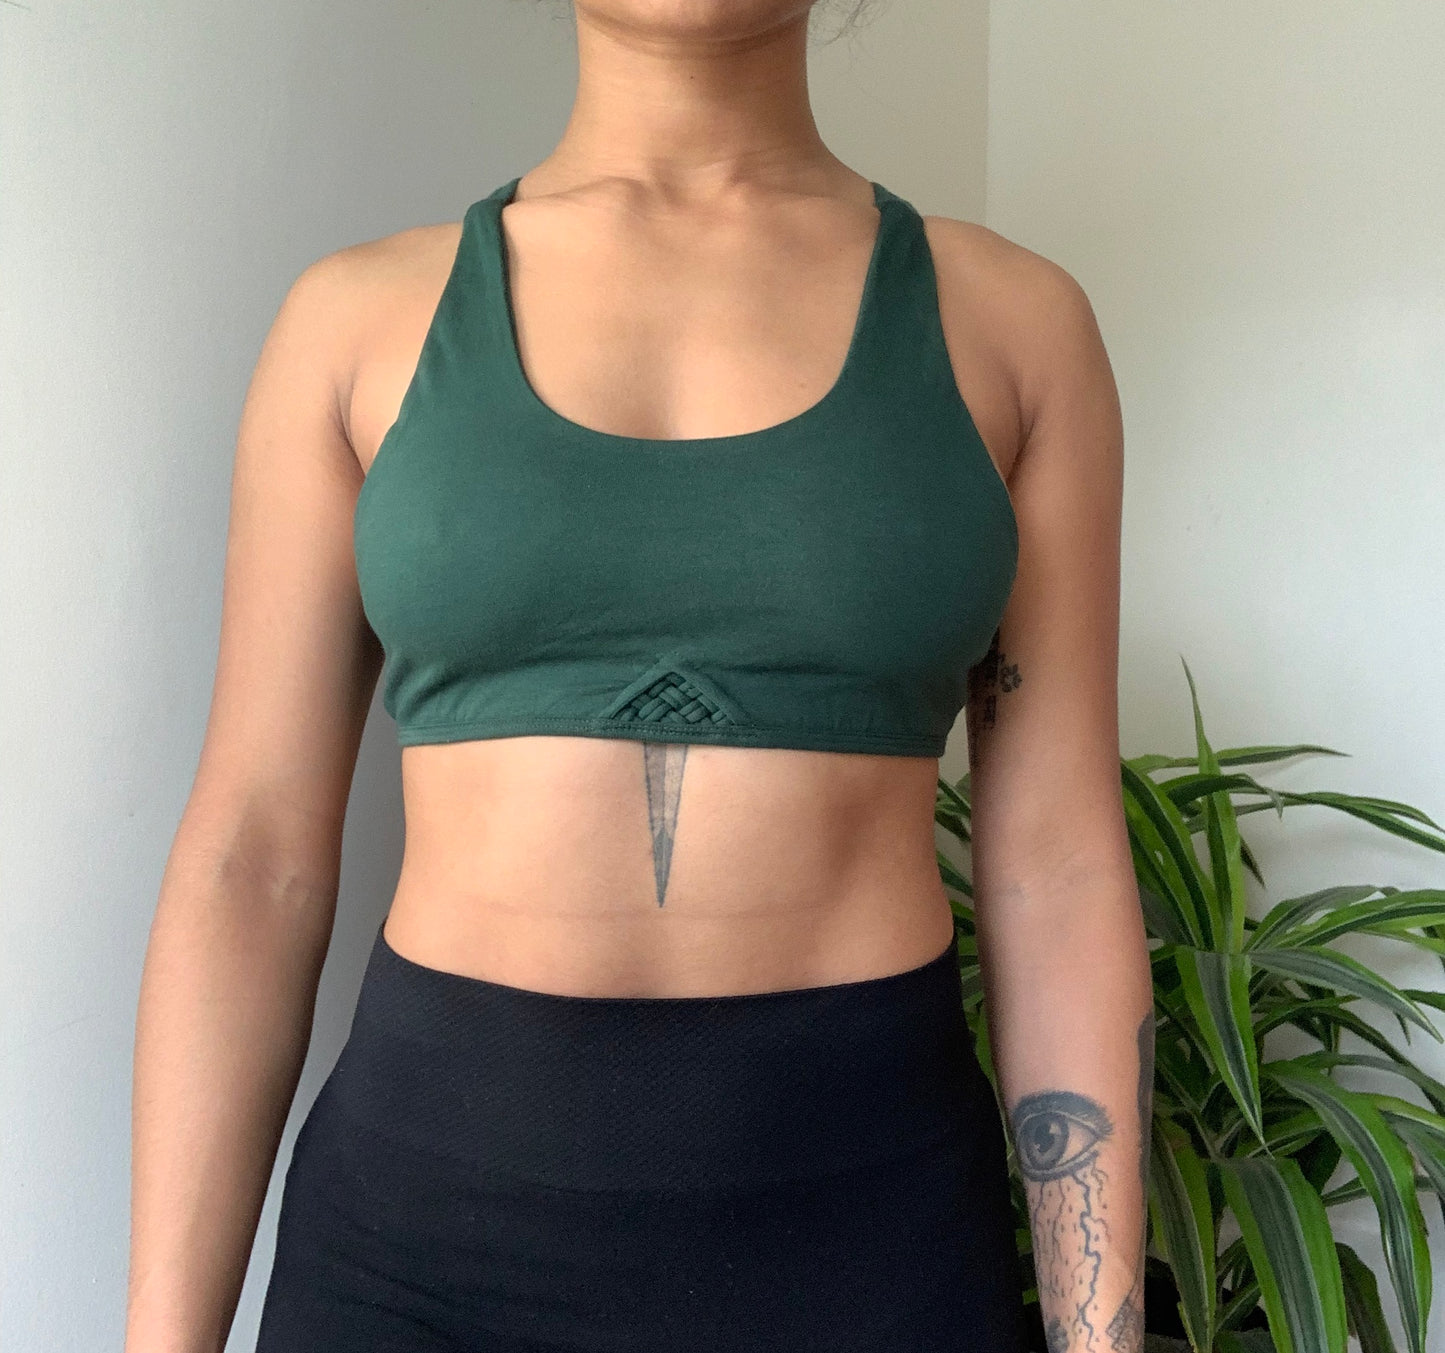 Green Flower Of Life Yoga Top